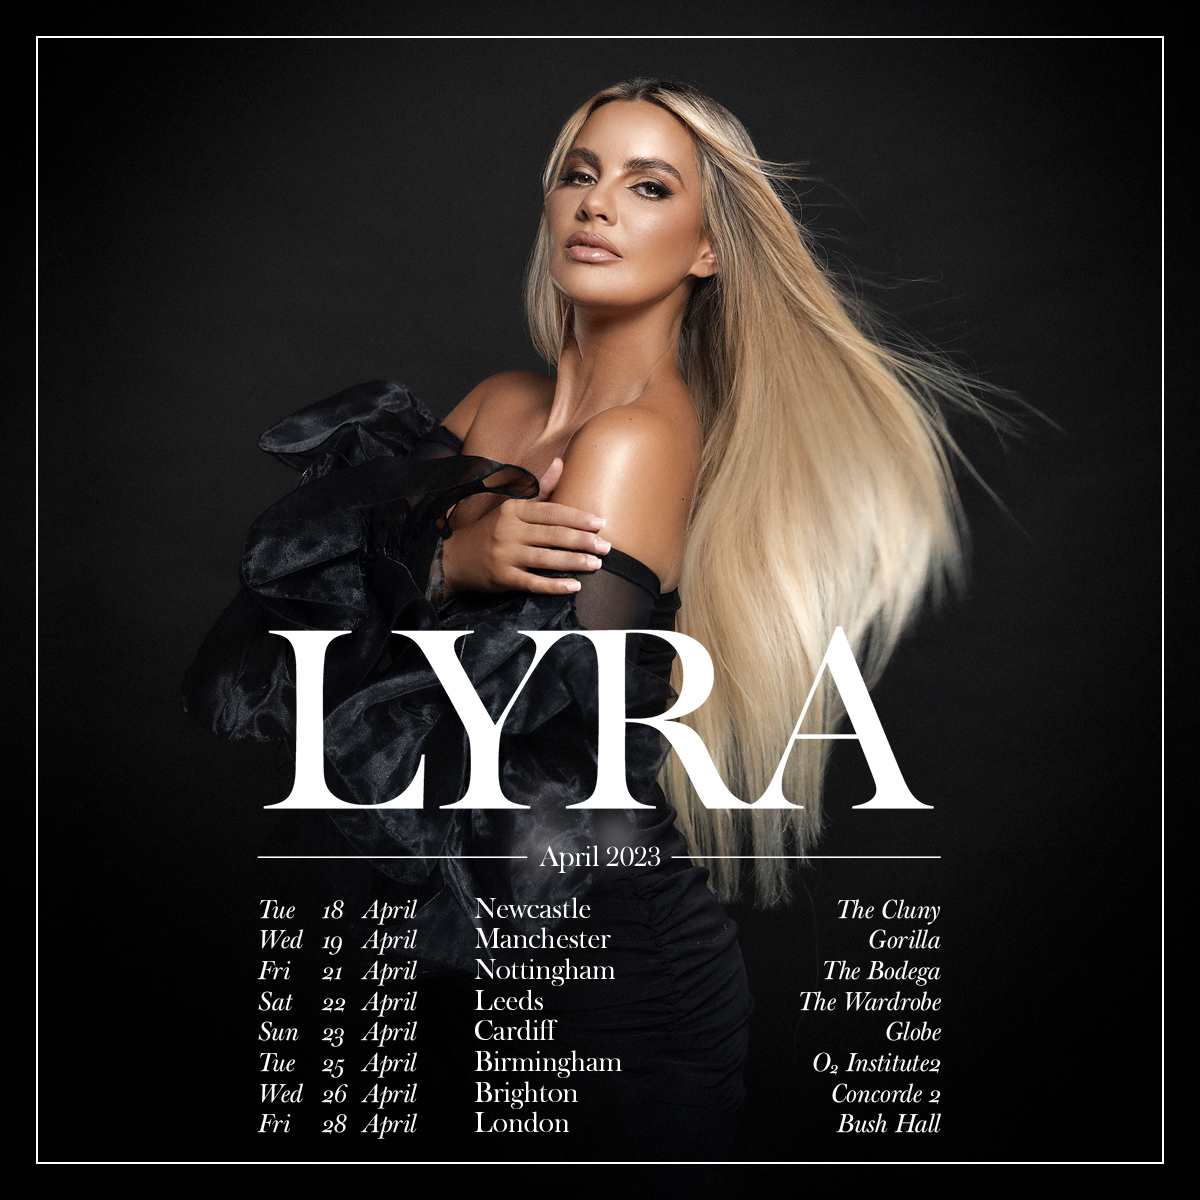 ICYMI: Building on a rock solid foundation of inimitable songcraft, studio know-how and an extraordinary vocal presence, singer-songwriter @thisislyra will head out on her debut UK tour next year ✨ Secure your tickets now 👉 livenation.uk/lqv450LB3rW